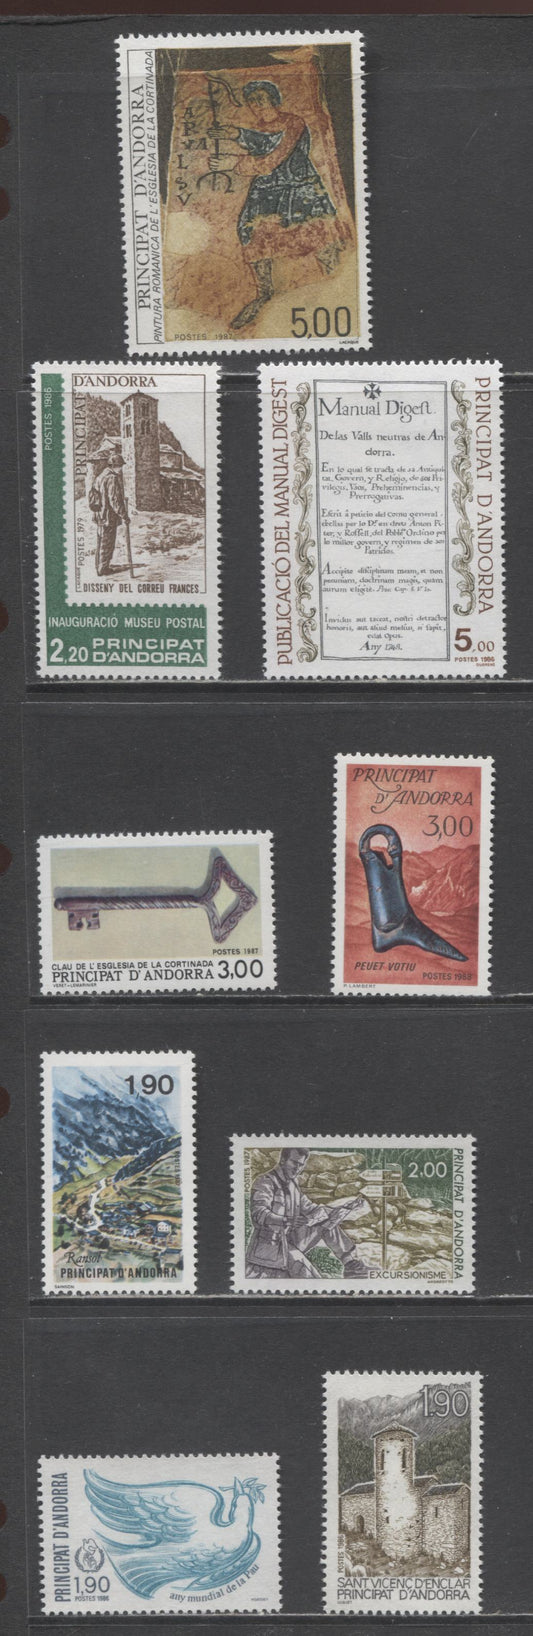 Lot 9 Andorra (French Admin) SC#343/361 1986-1988 Postal Museum Inauguration / Shoemakers Issues, 9 VFNH Singles, Click on Listing to See ALL Pictures, 2017 Scott Cat. $14.8